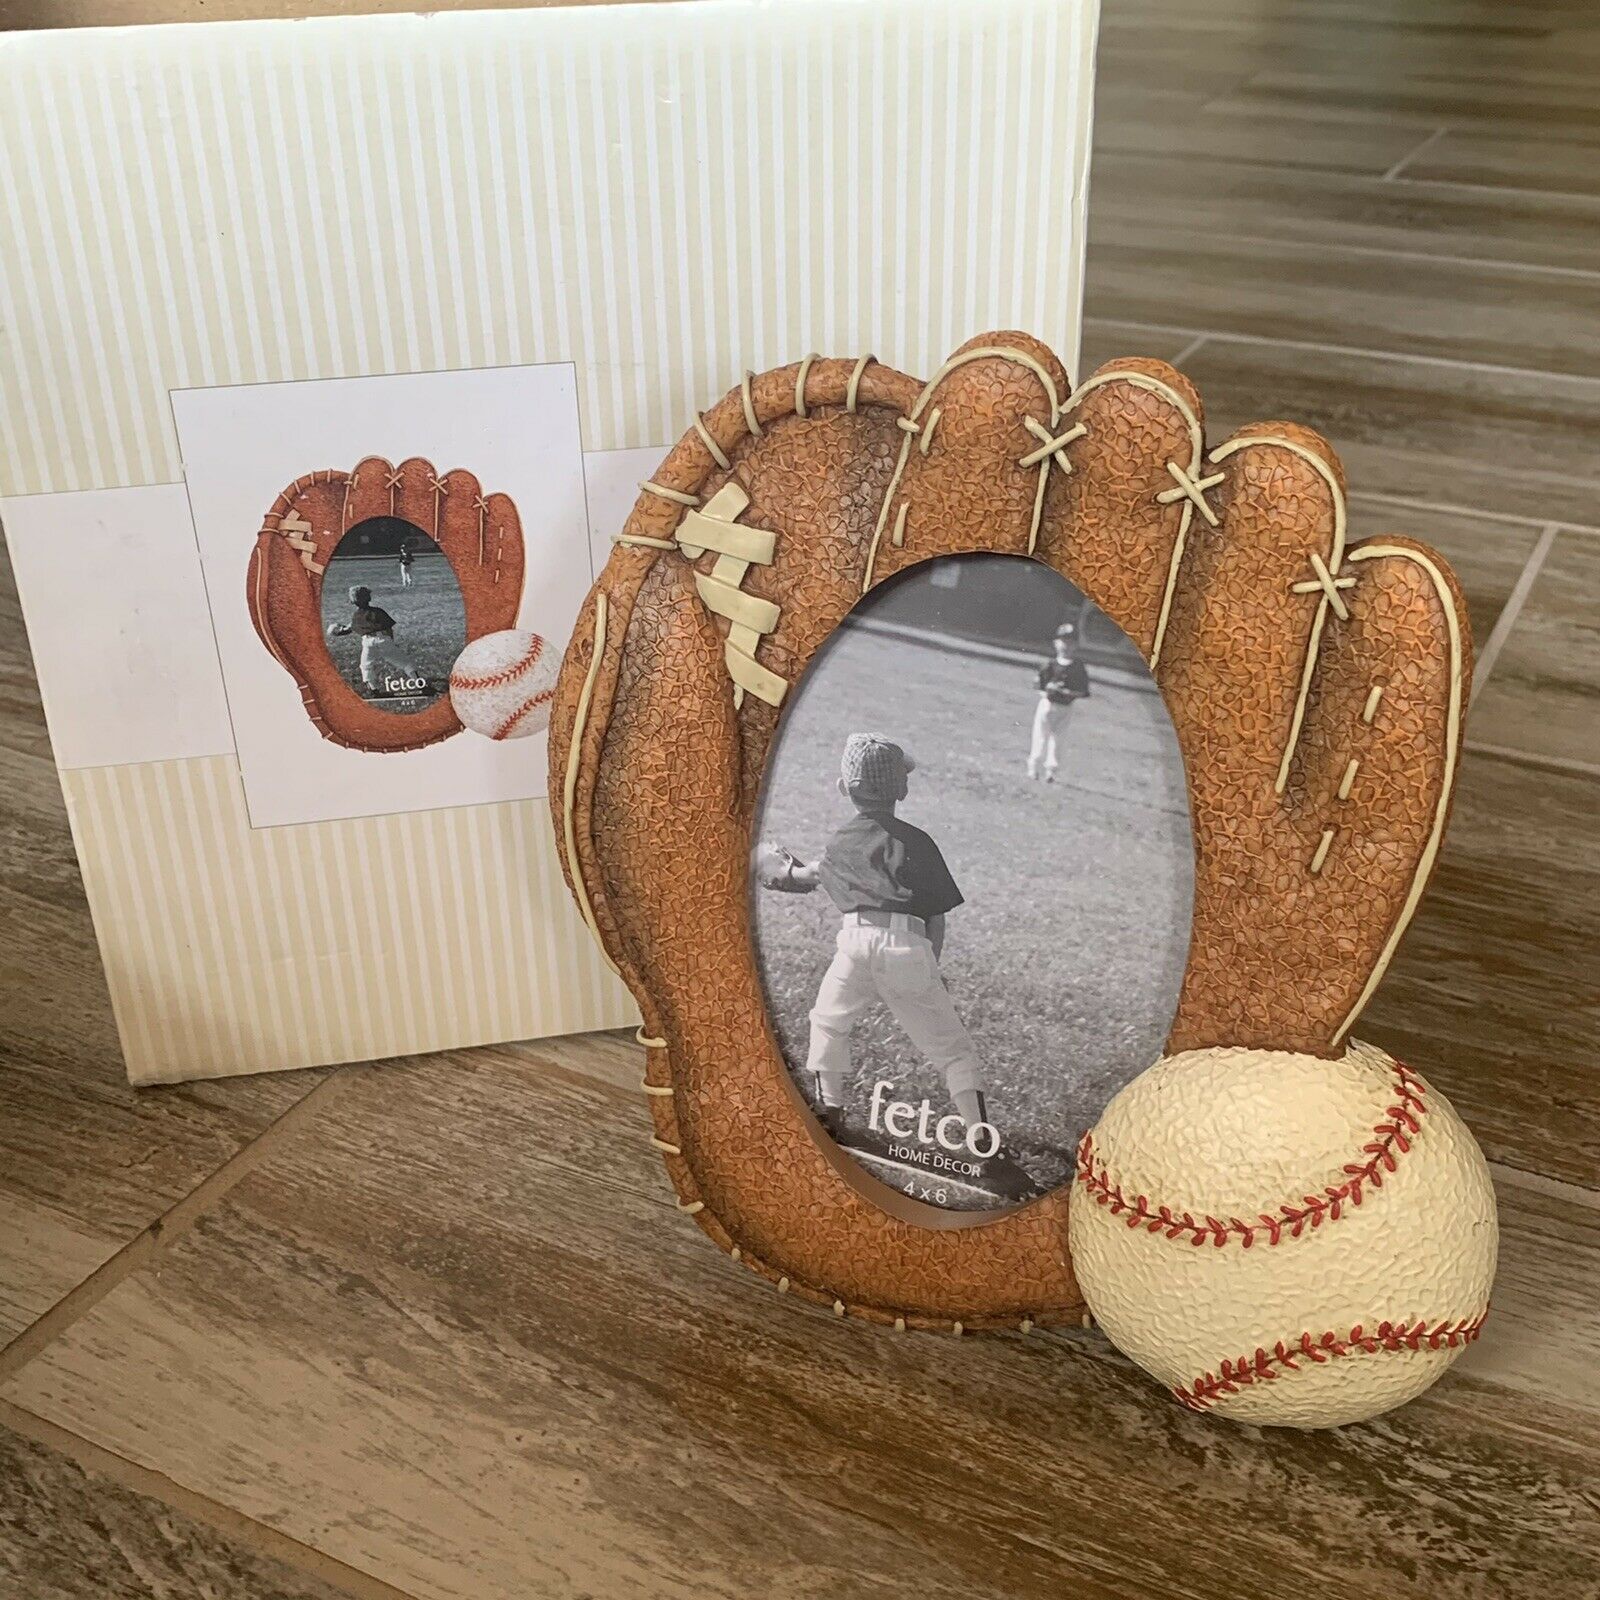 Fetco 3-d Ceramic Baseball & Glove Picture Frame For 4”x 6” Oval Photo New